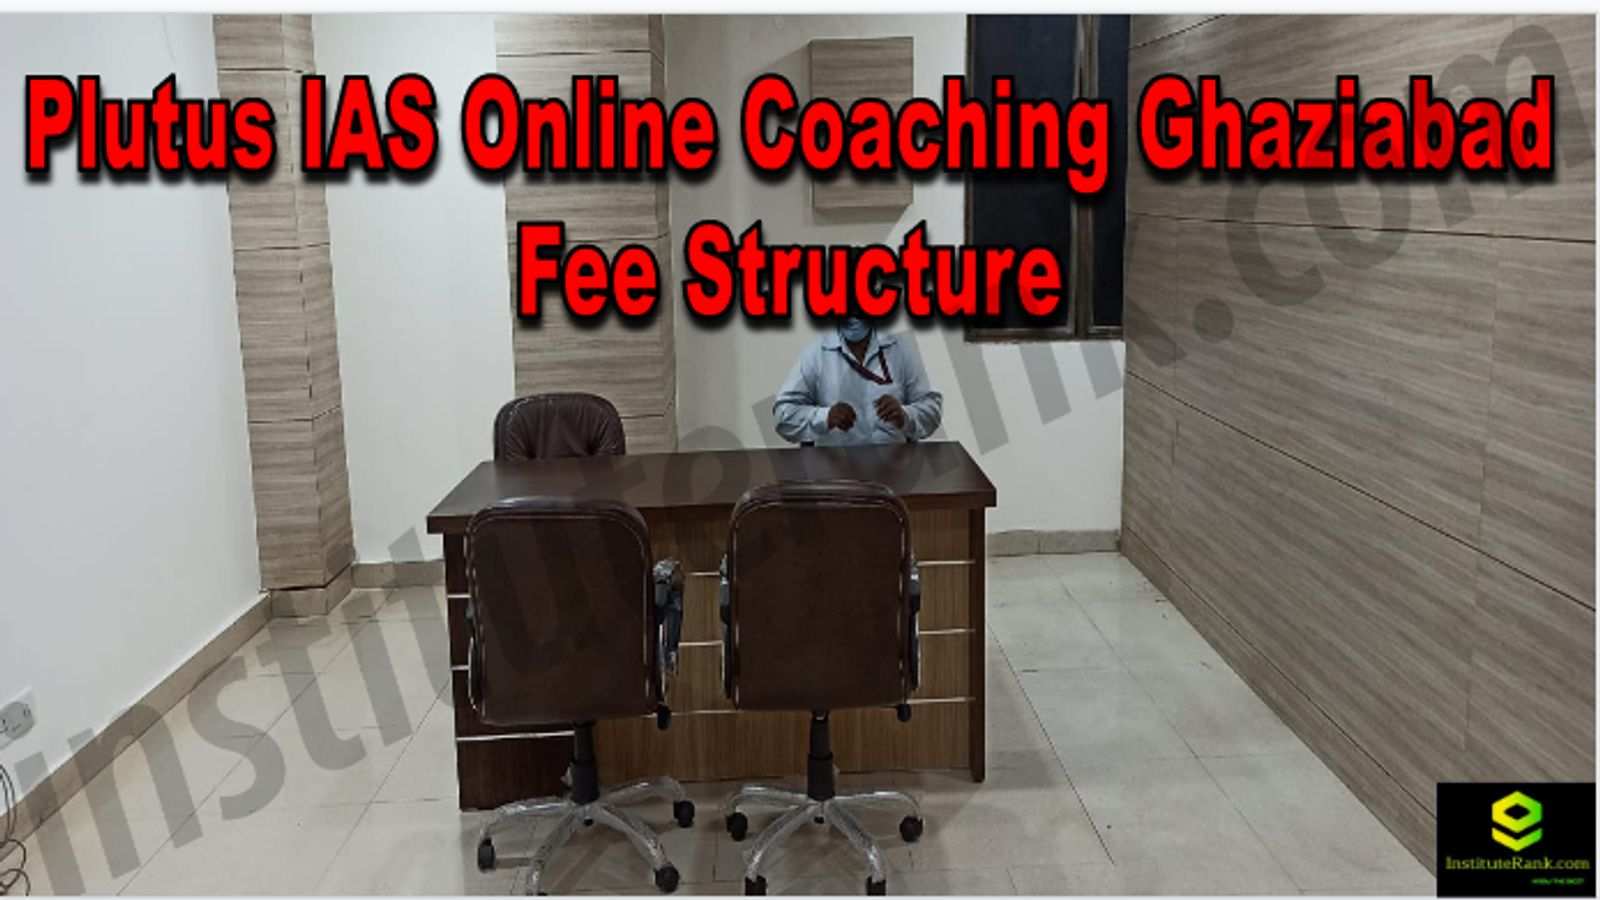 Plutus IAS Online Coaching Ghaziabad Reviews Fee Structure